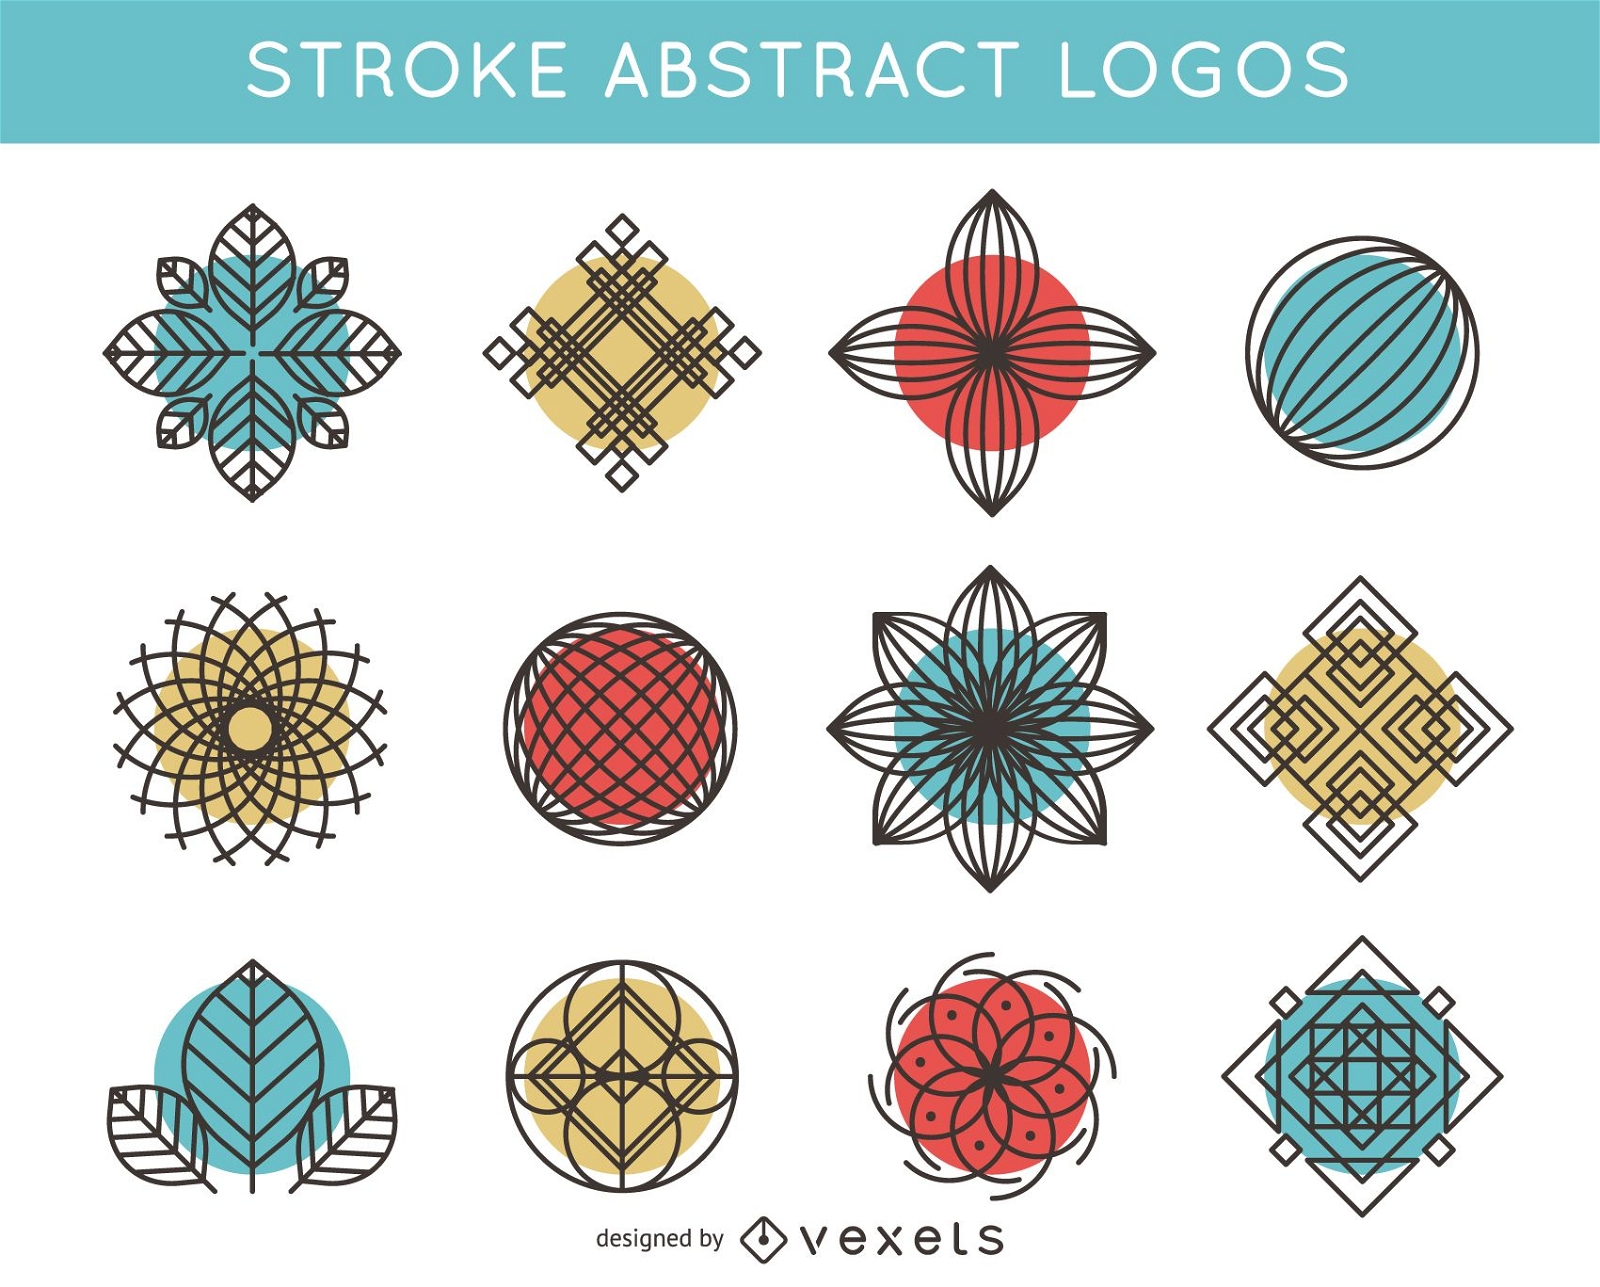 Stroke and abstract logo pack